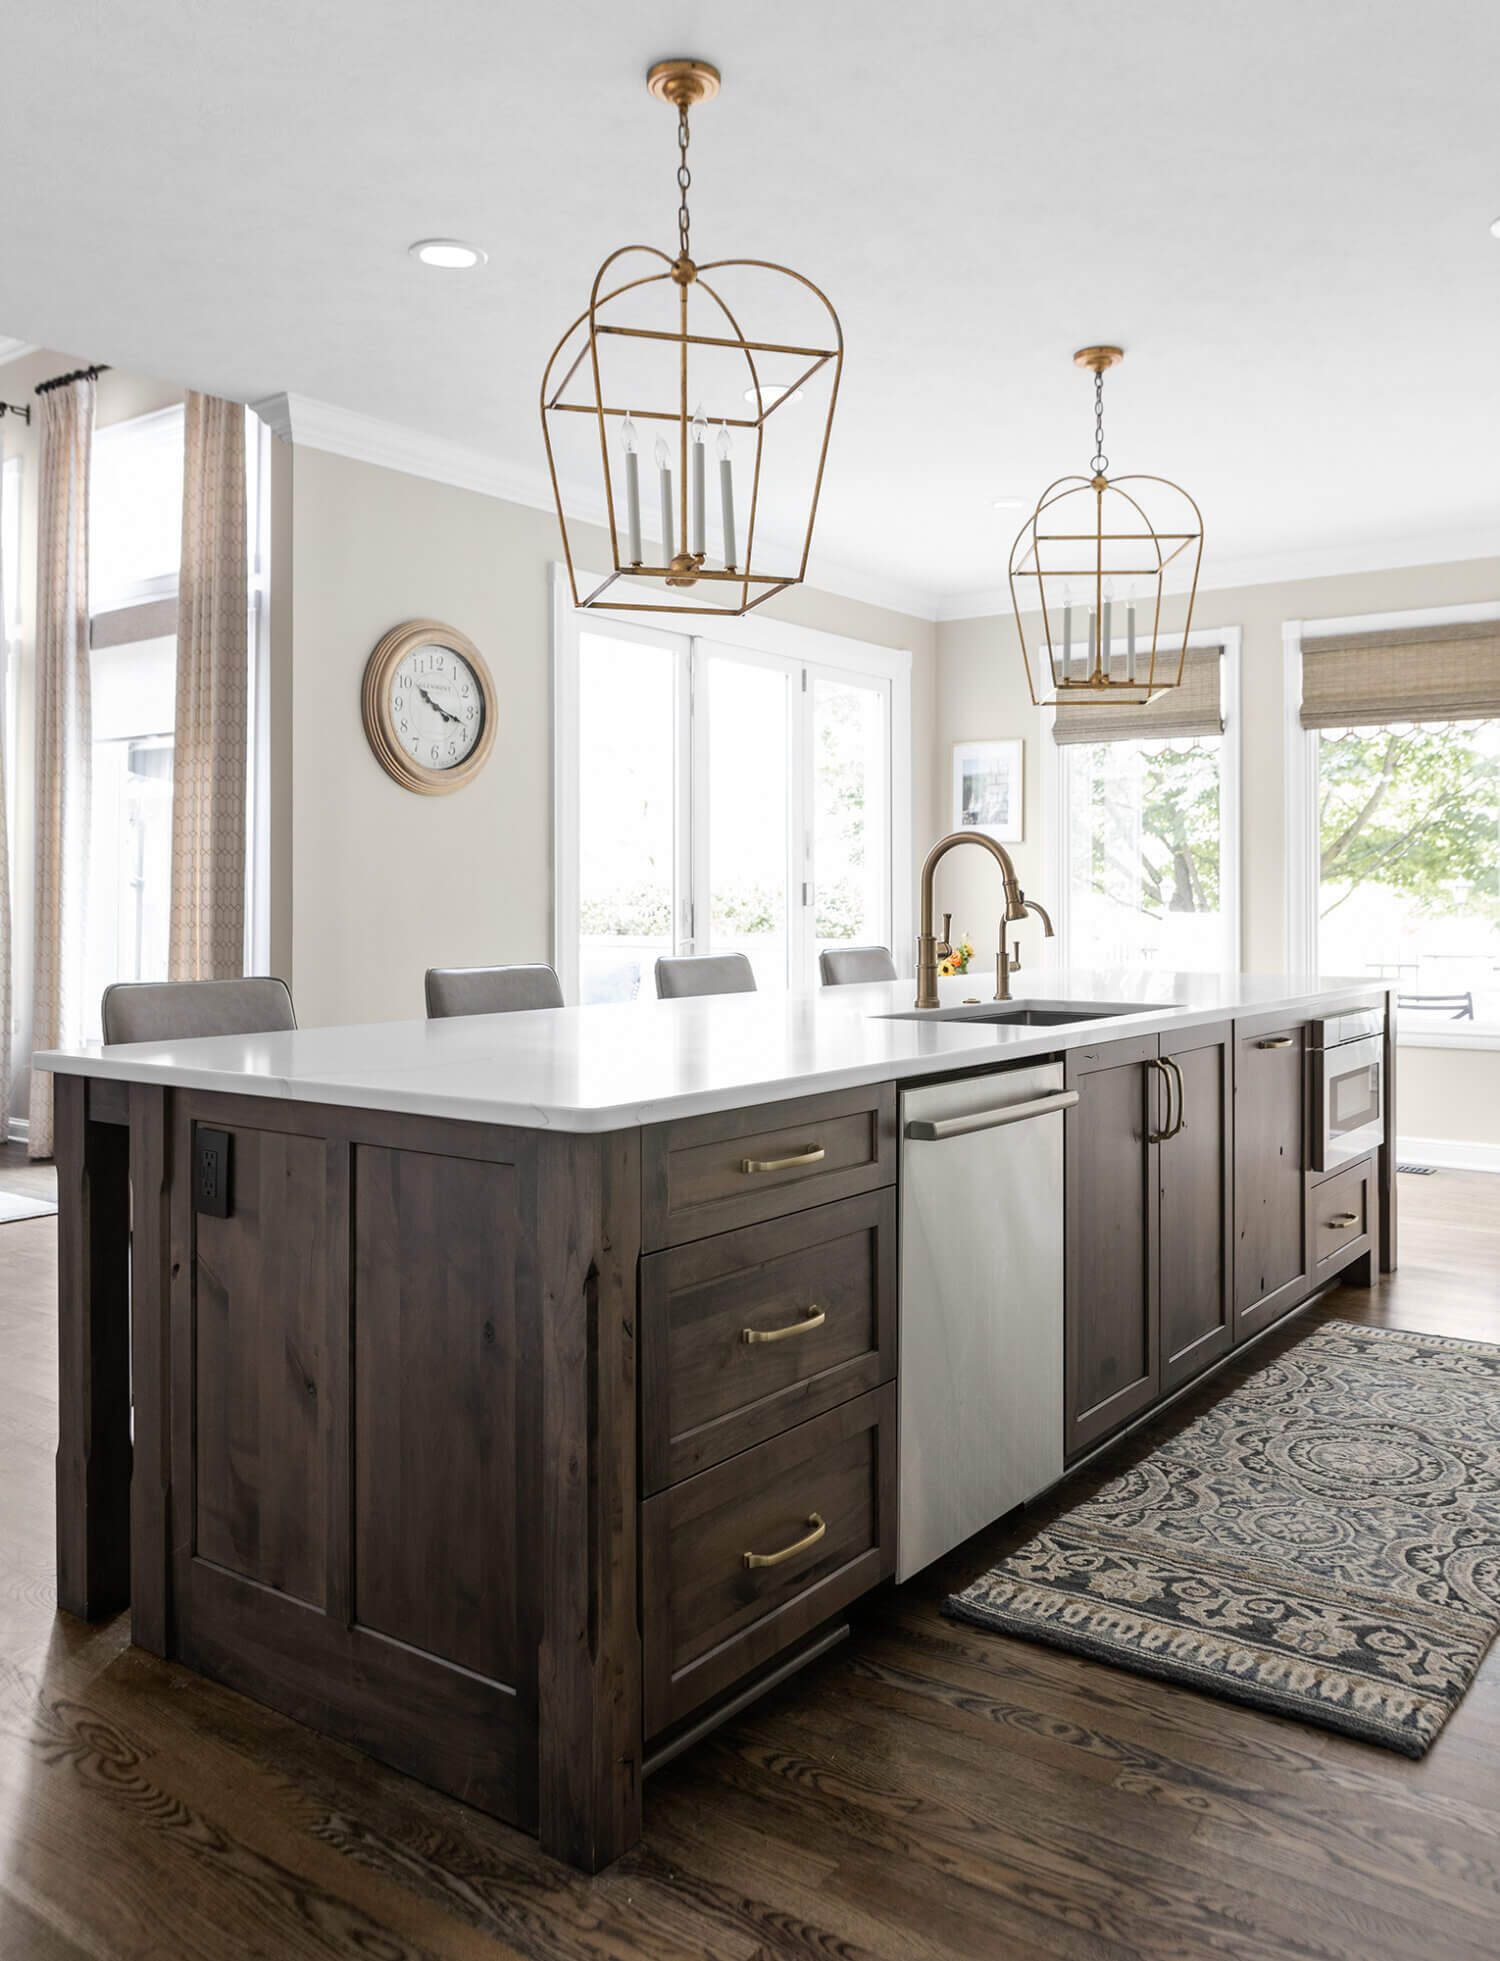 A rustic knotty alder kitchen island with seating for six and two large pendant lights.